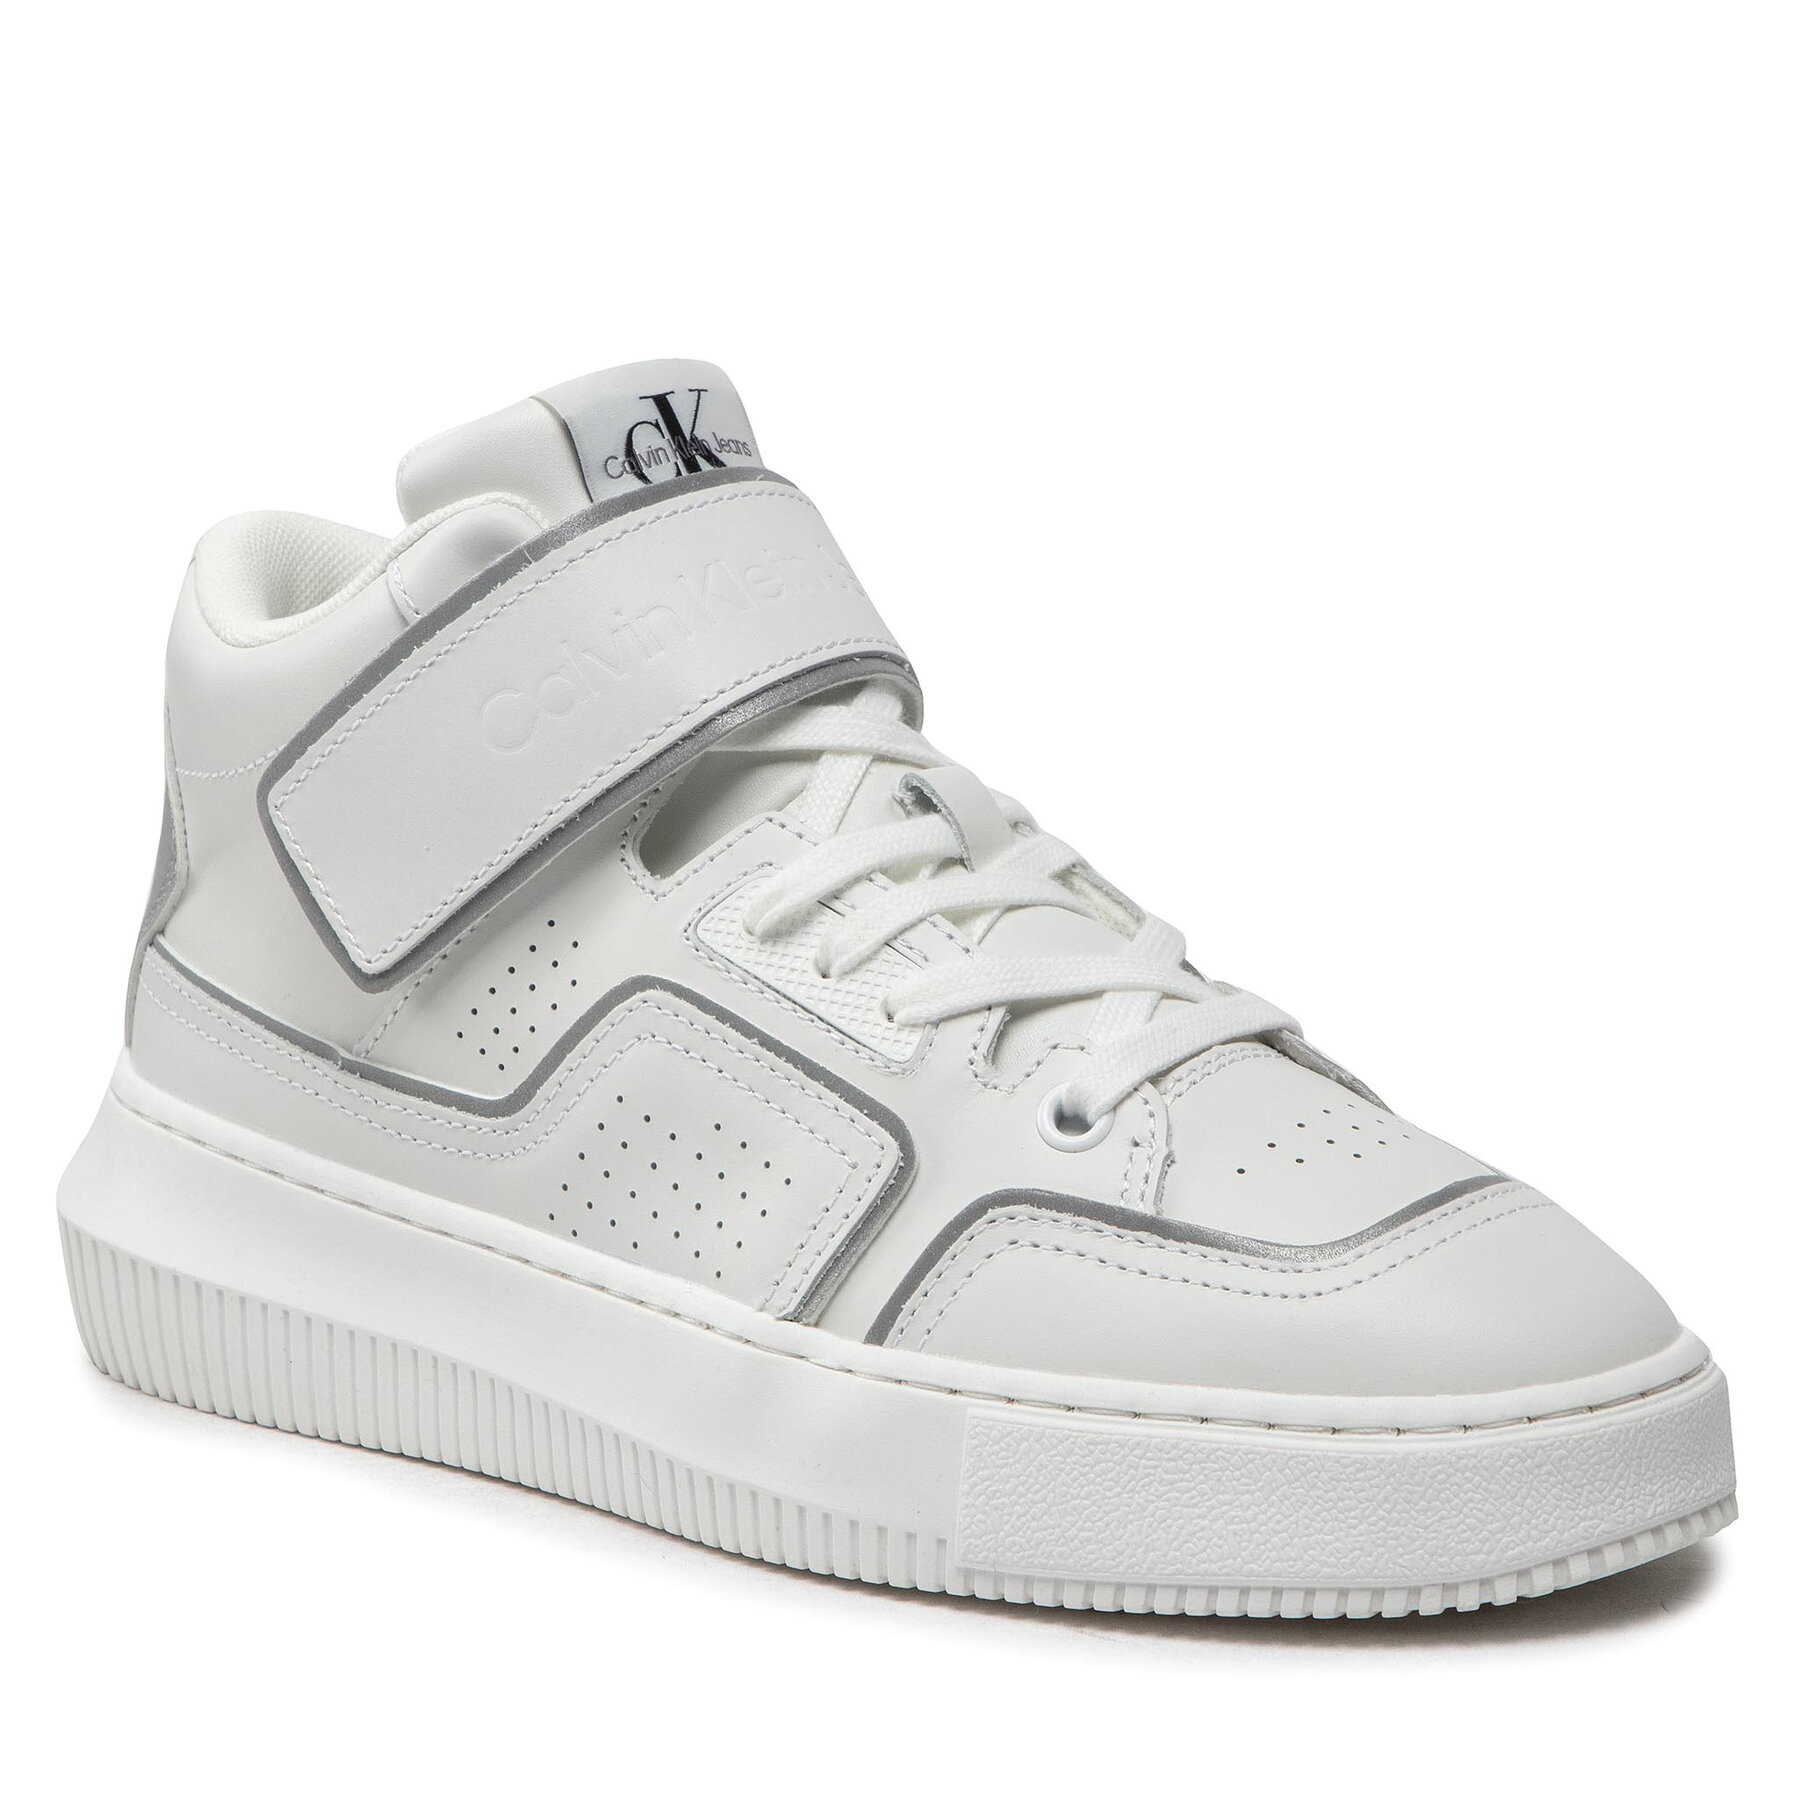 Sneakers Calvin Klein Jeans Chunky Cupsole Laceup Mid M YW0YW00811 White/Silver 0LC CALVIN KLEIN JEANS imagine noua